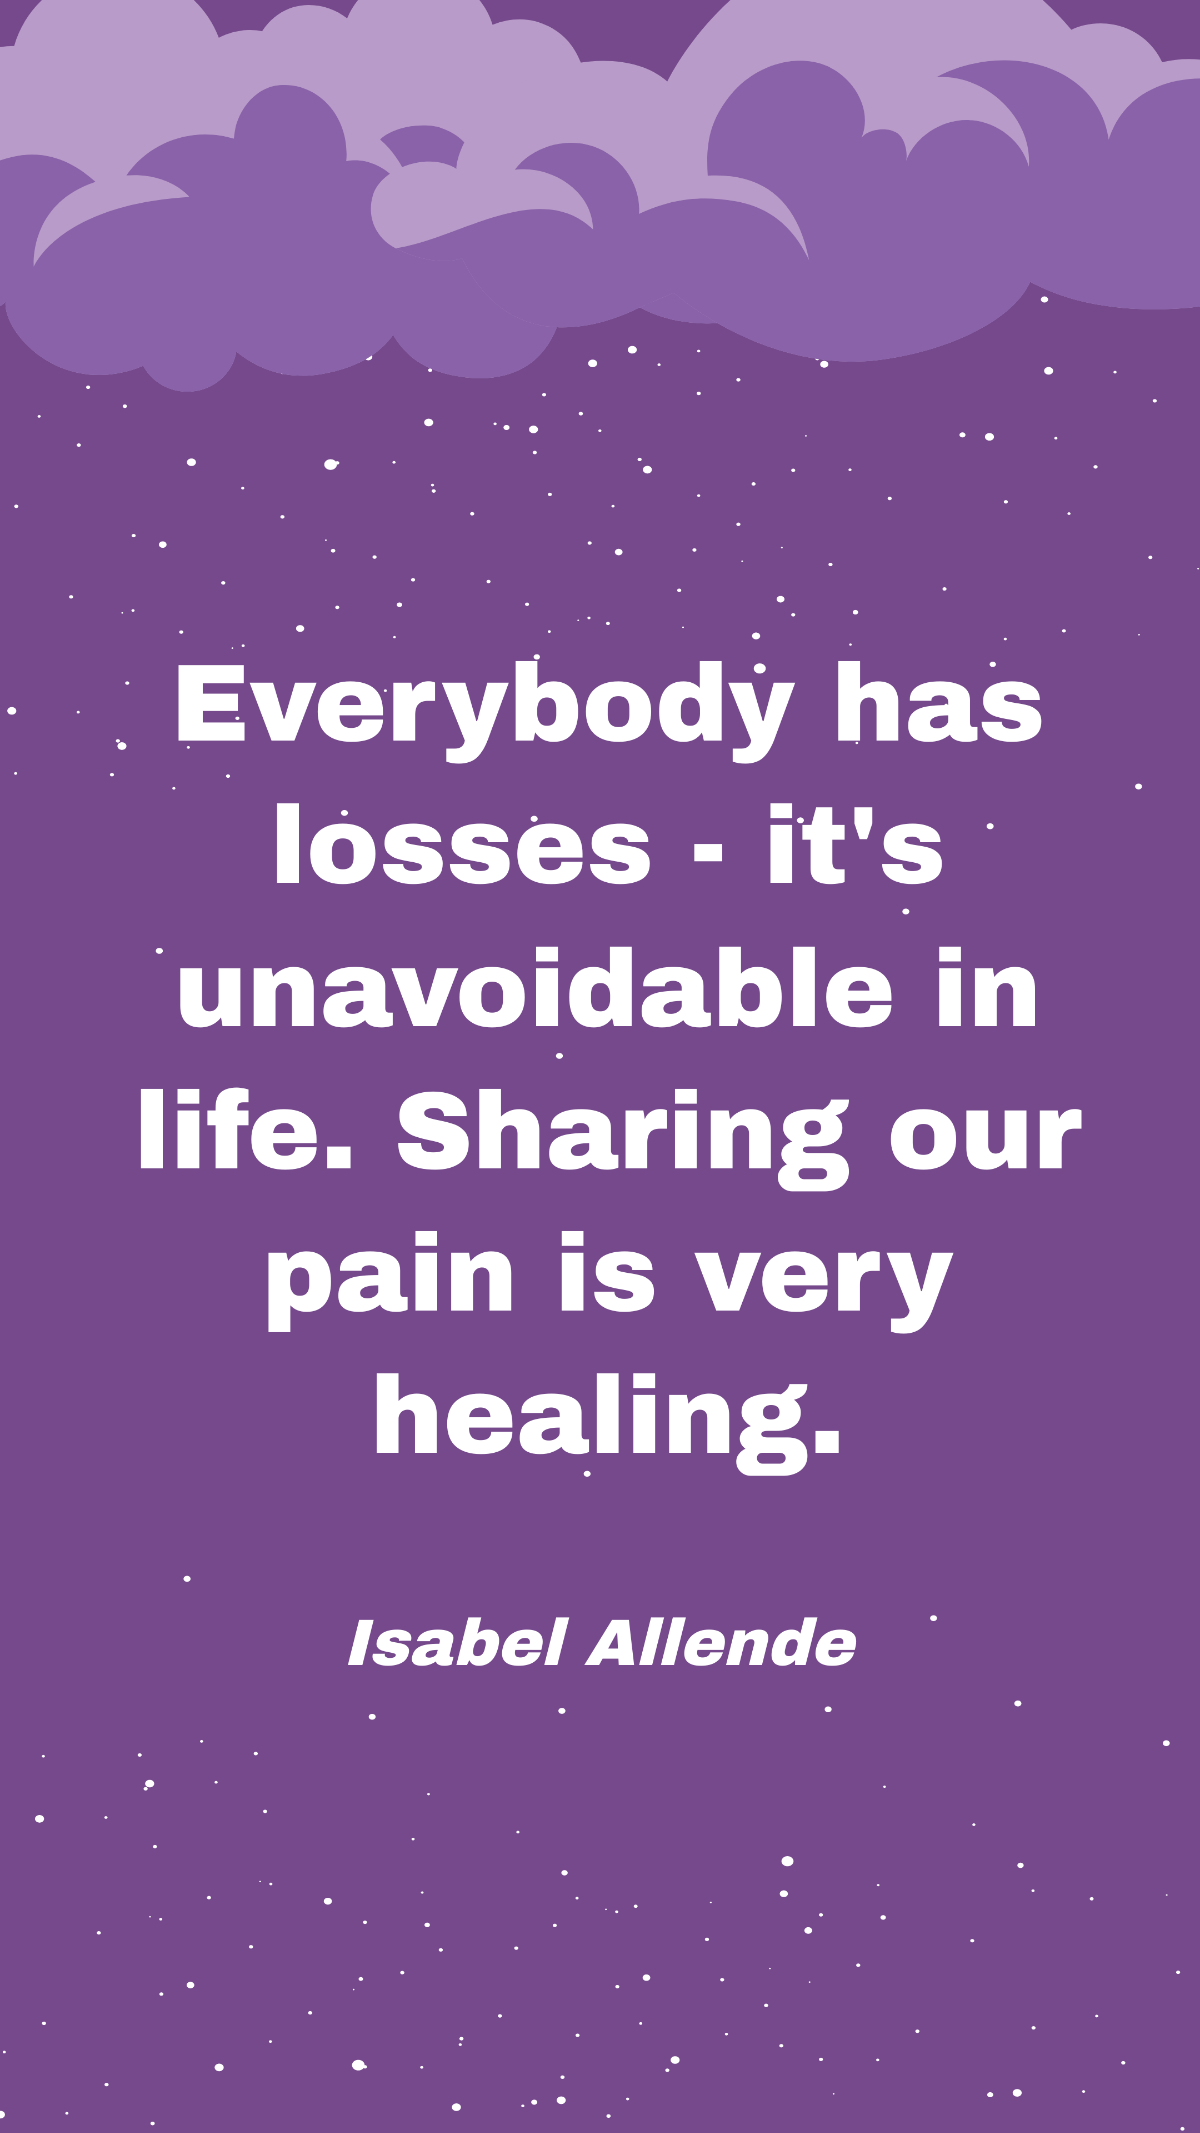 Isabel Allende - Everybody has losses - it's unavoidable in life. Sharing our pain is very healing. Template